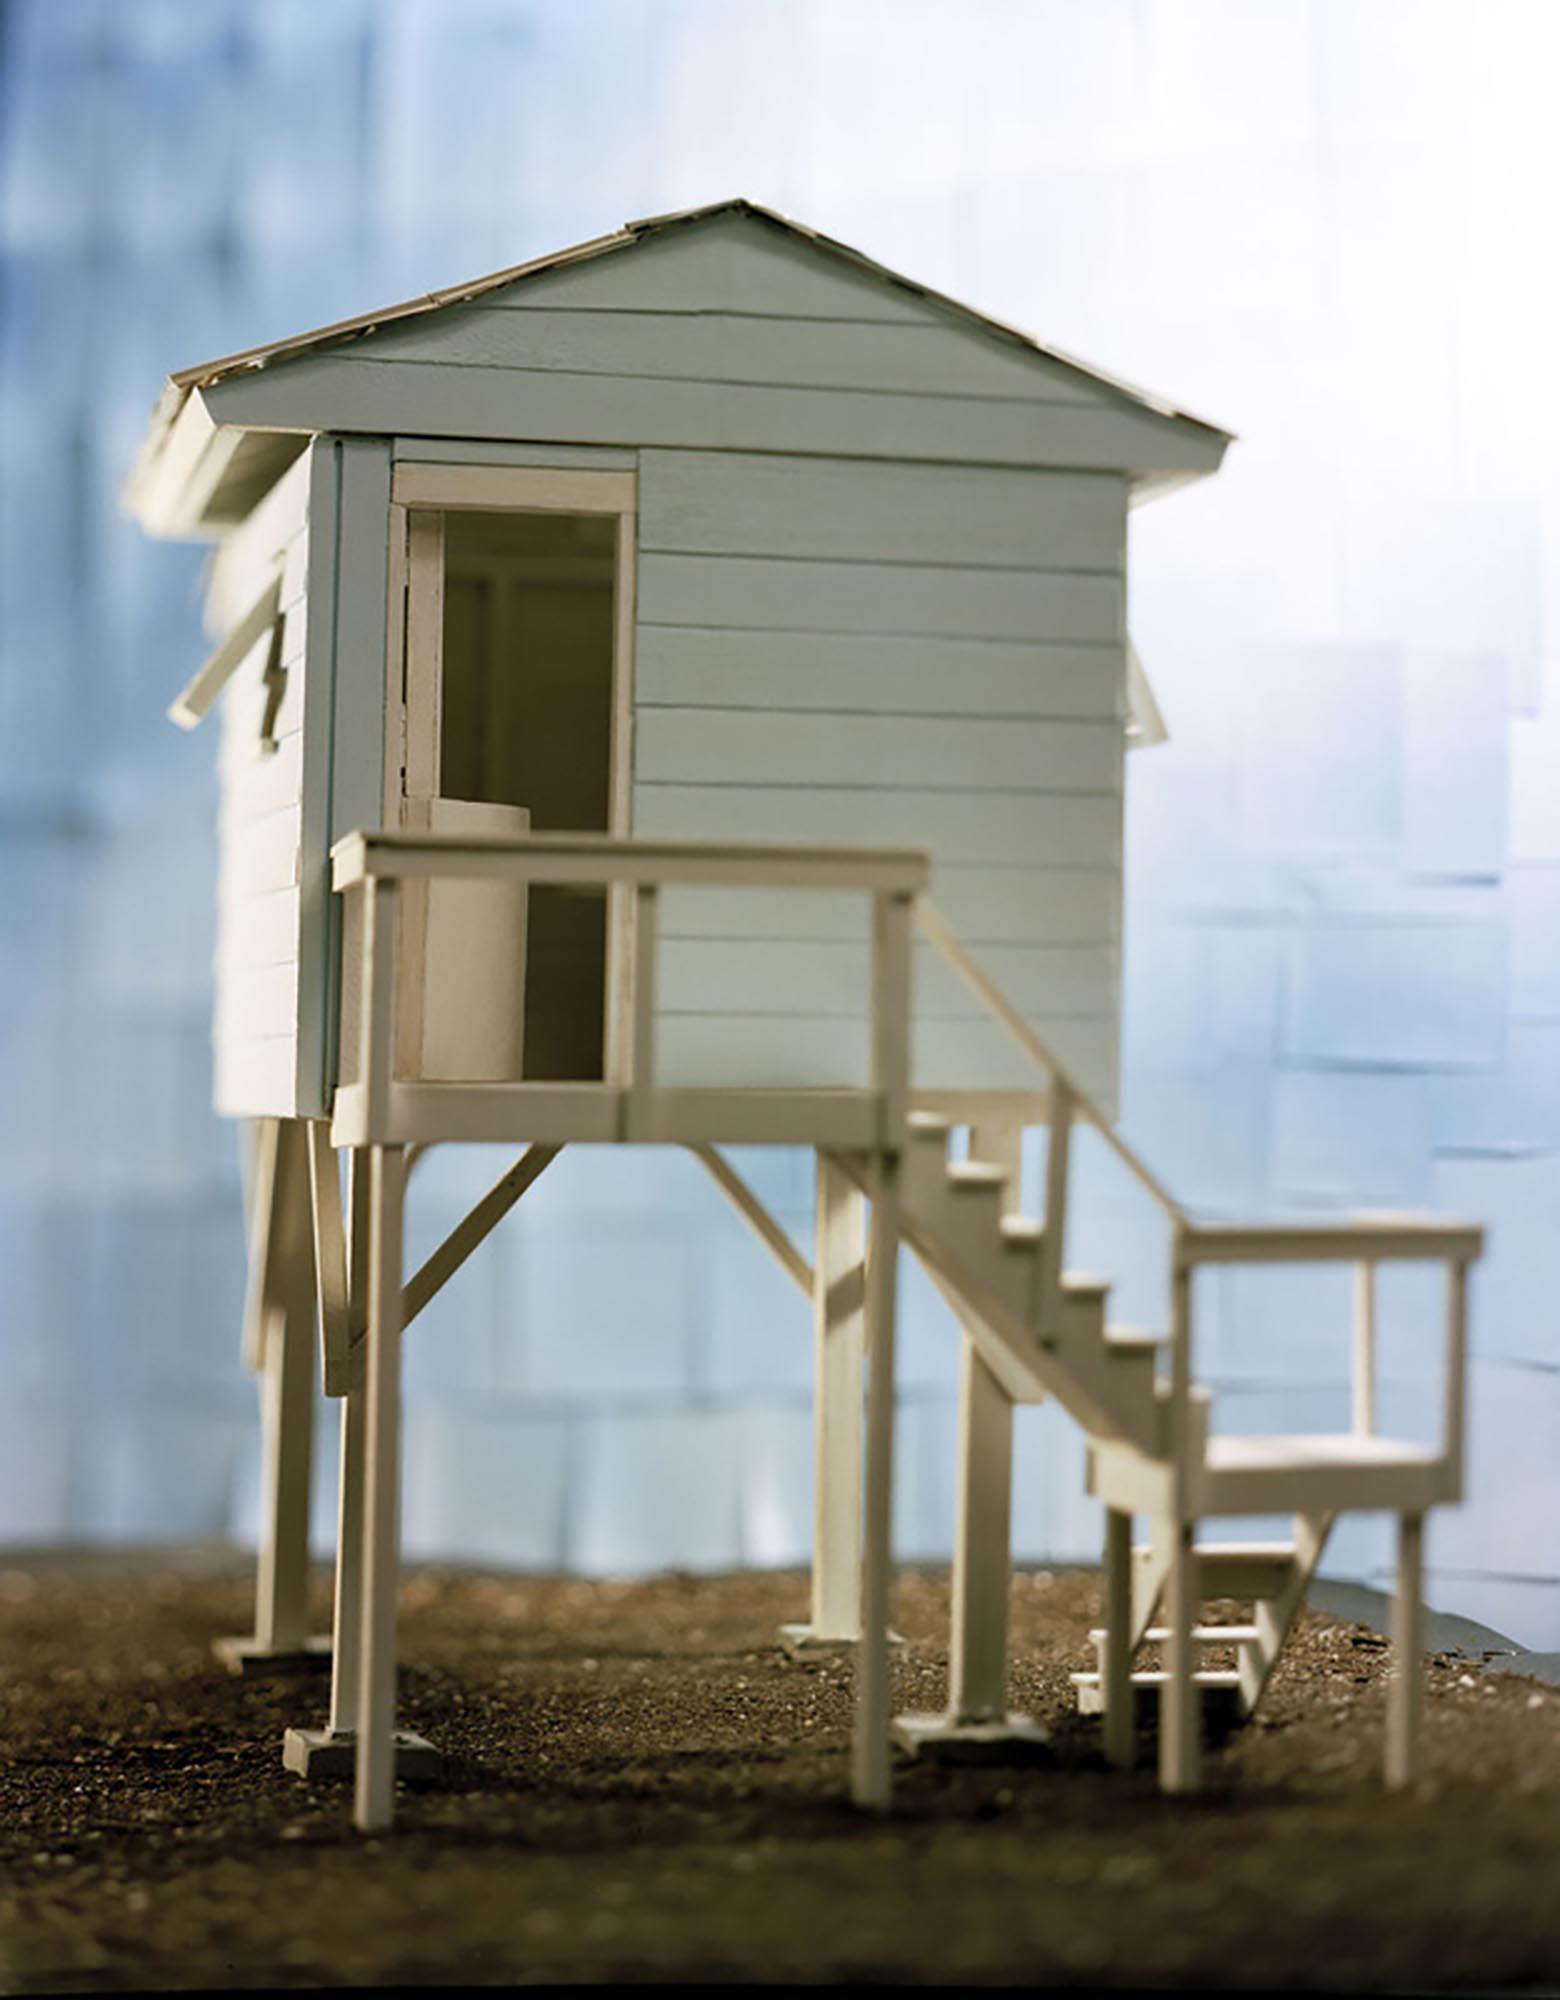 A small model of a raised house